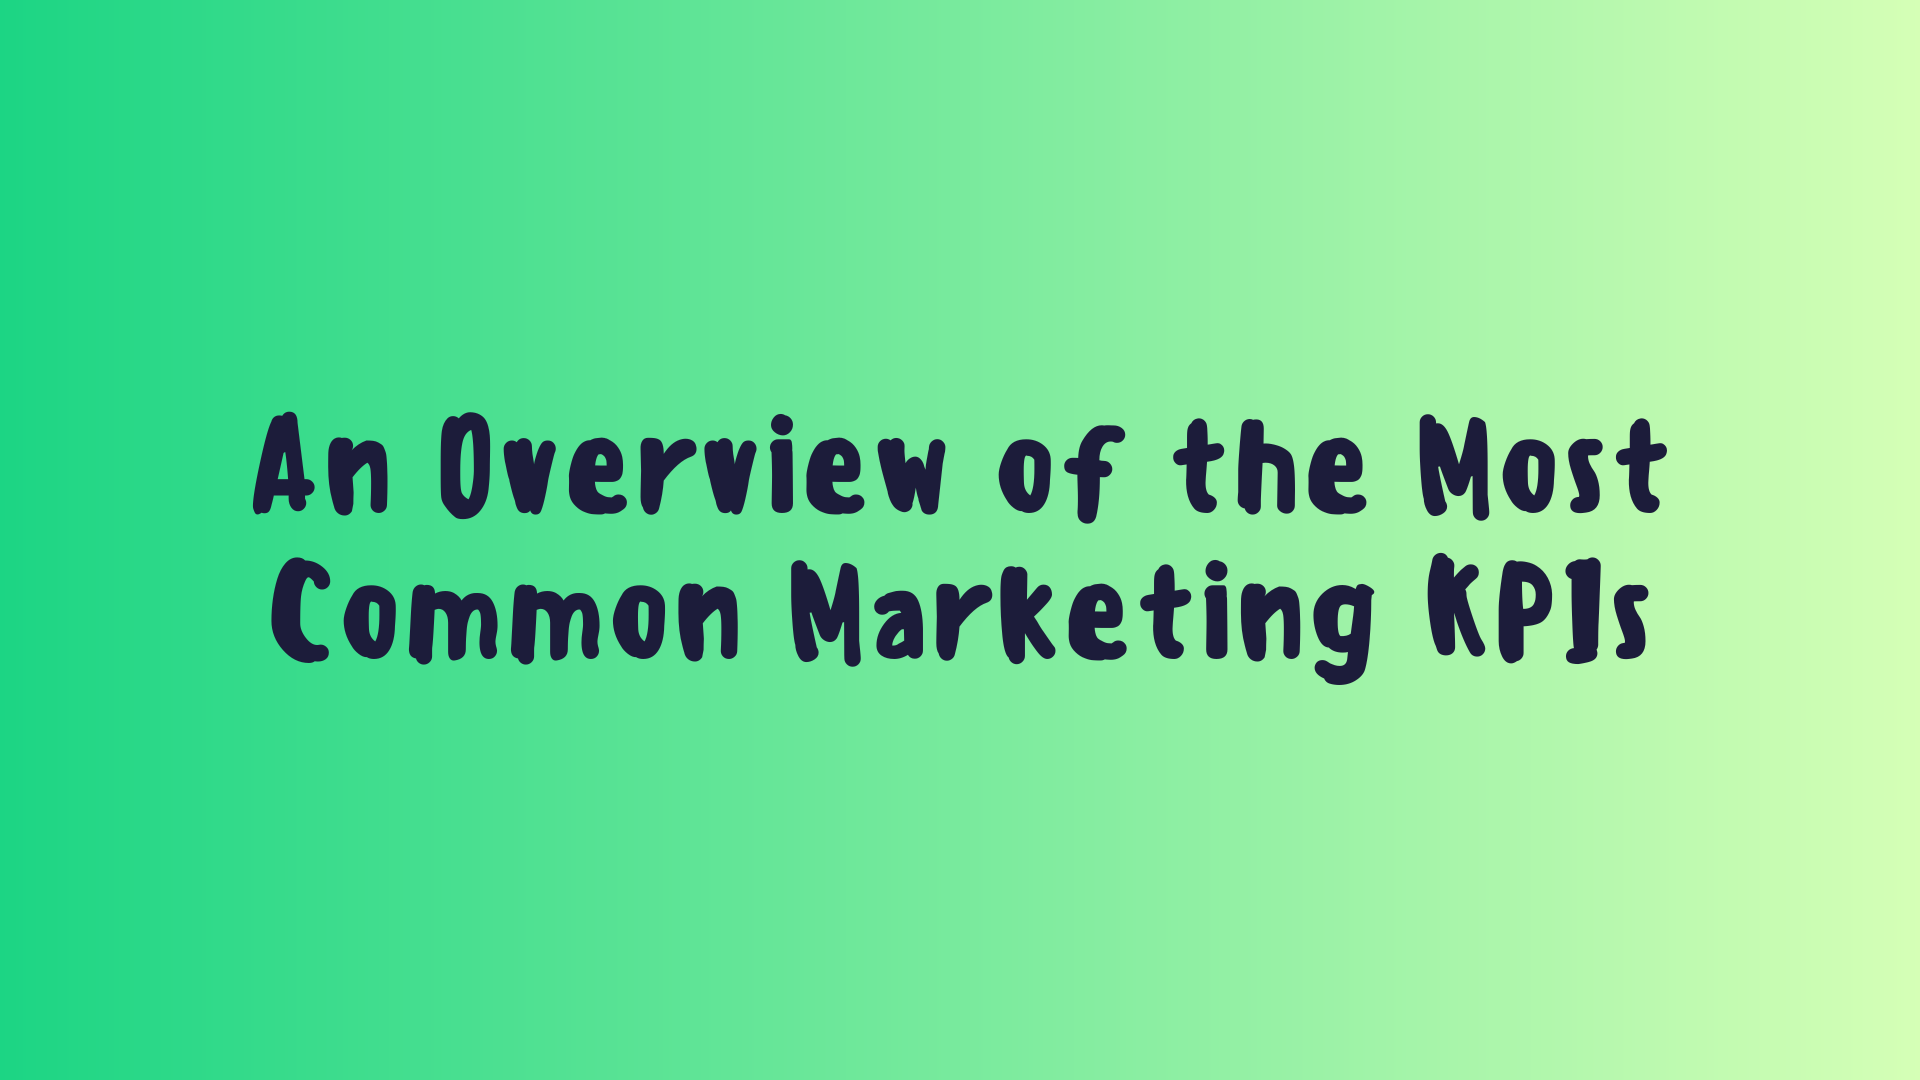 An Overview of the Most Common Marketing KPIs